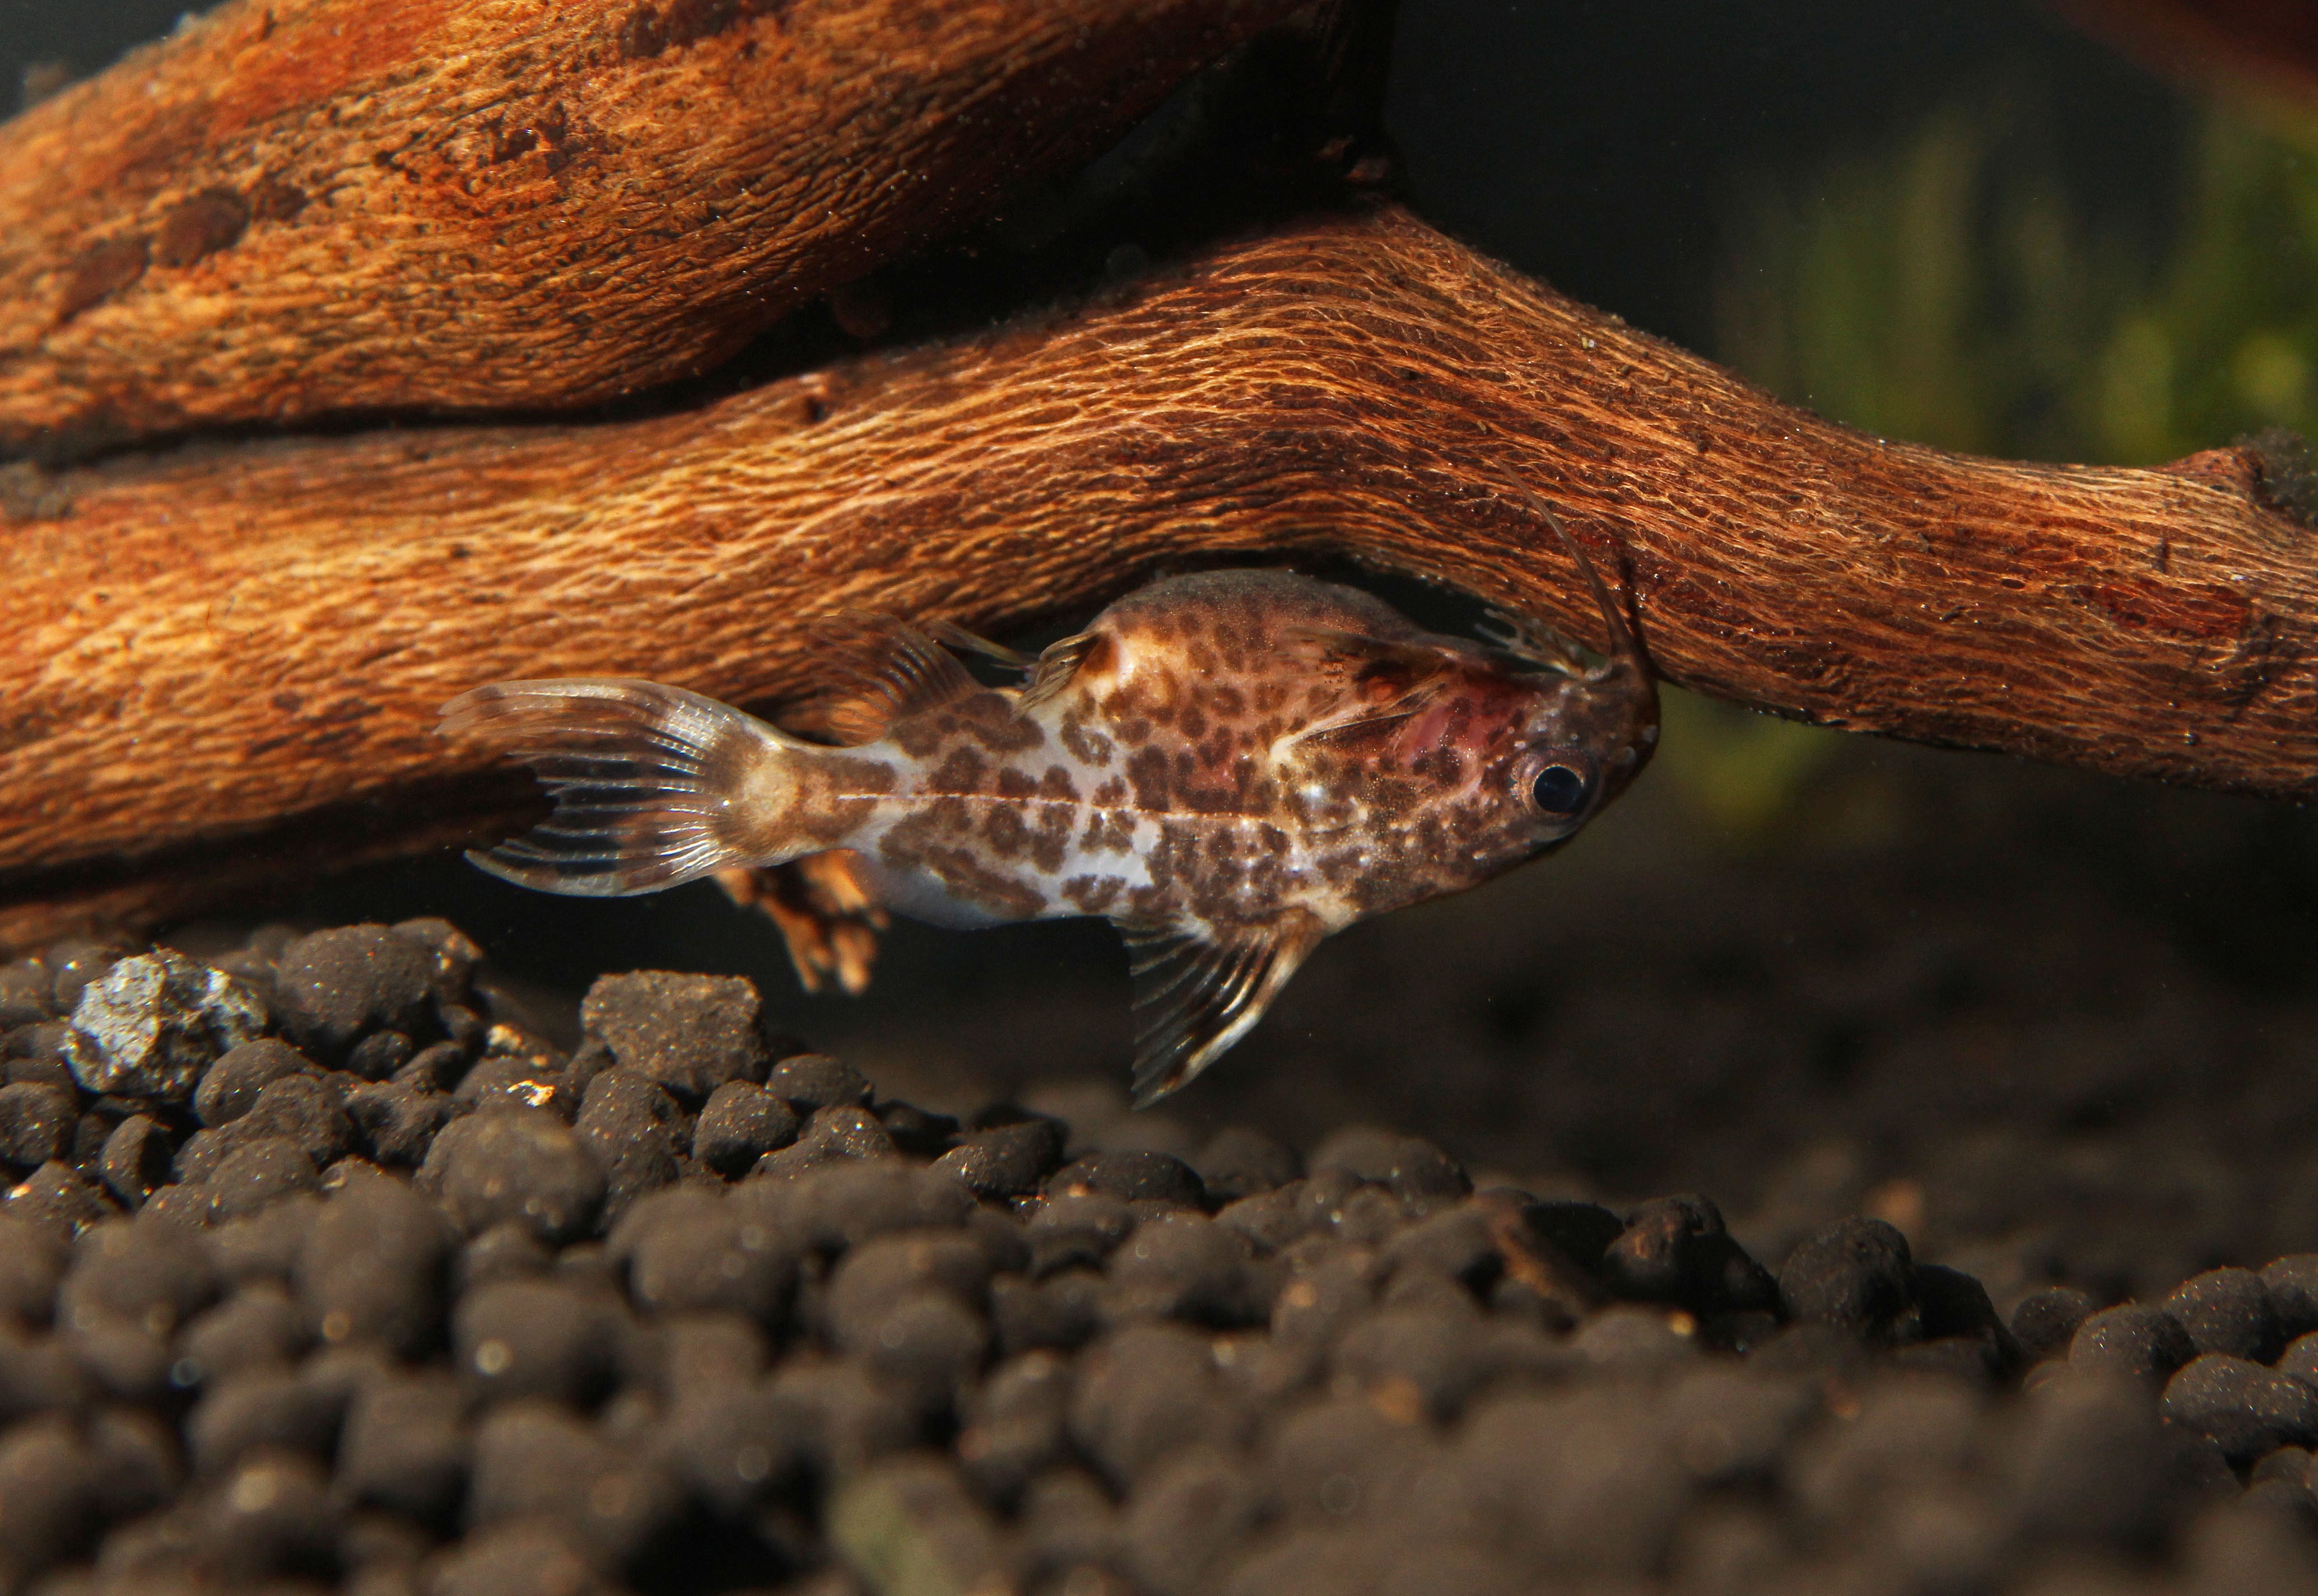 Synodontis  "Upside Down Cats"